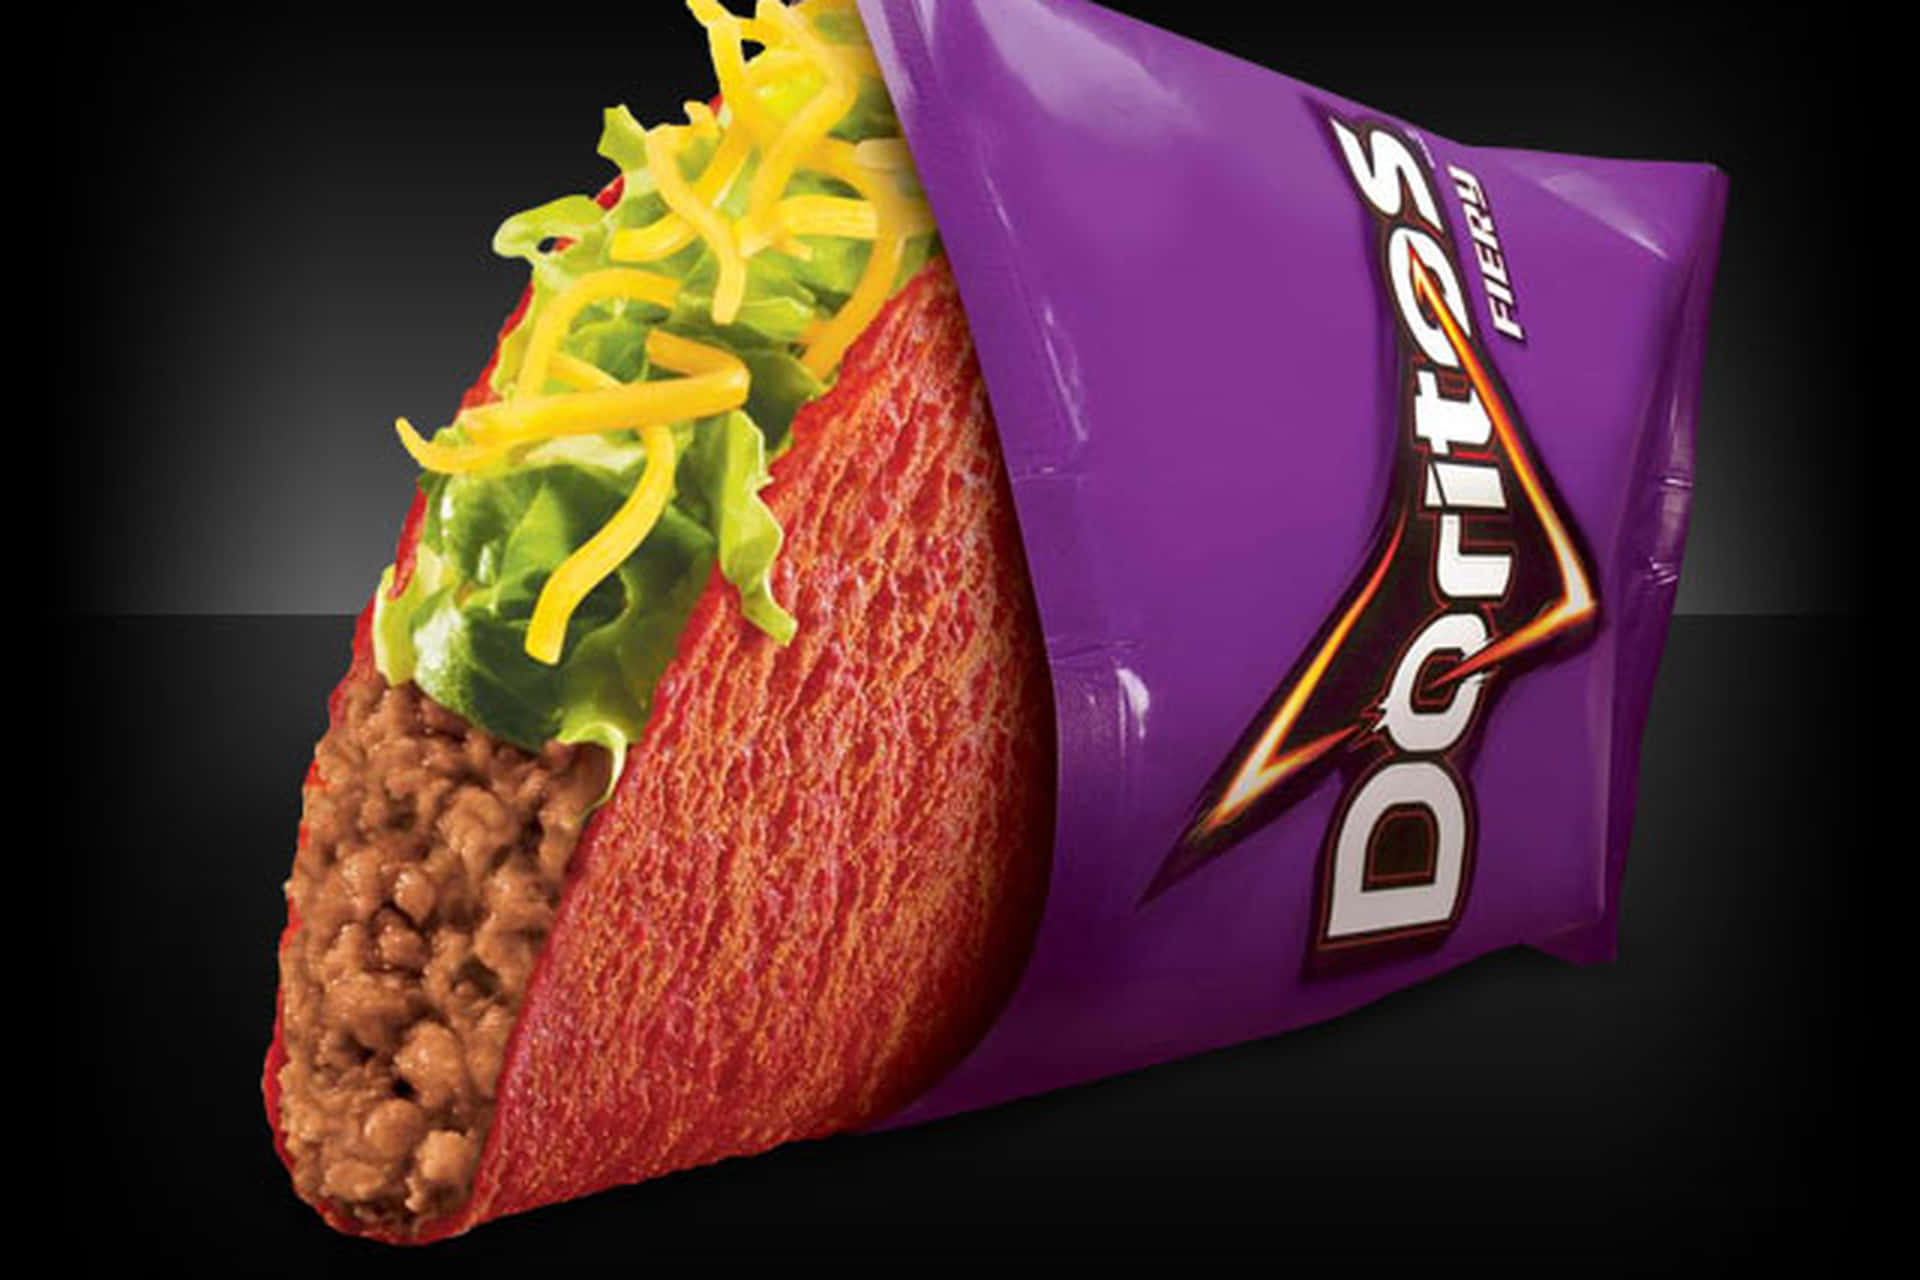 Enjoy a delicious Taco Bell meal, any way you like it!